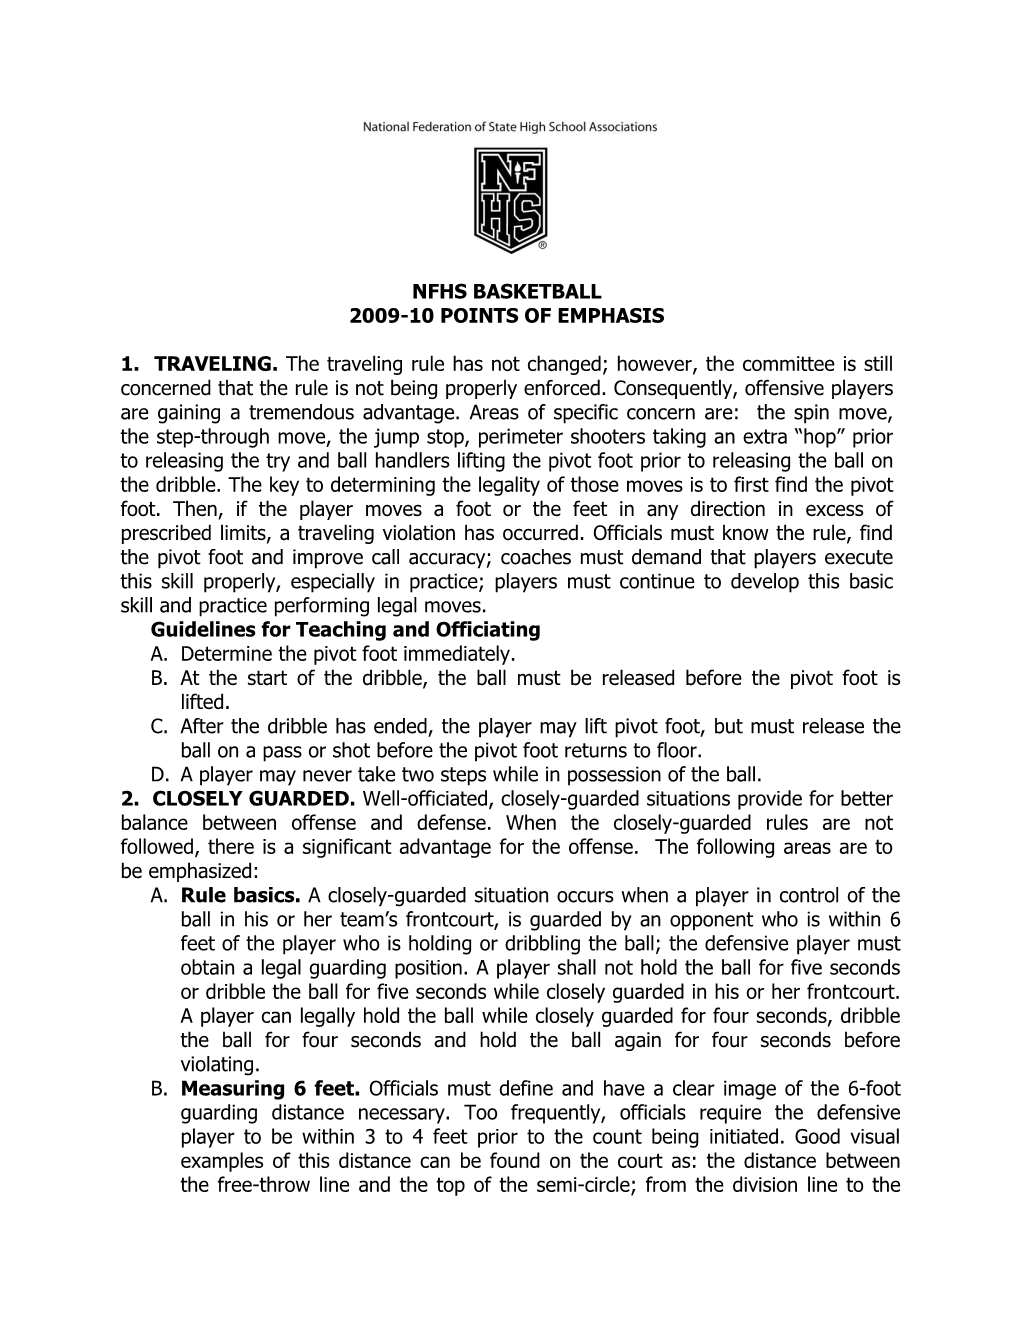 Nfhs Basketball 2009-10 Points of Emphasis 1. Traveling